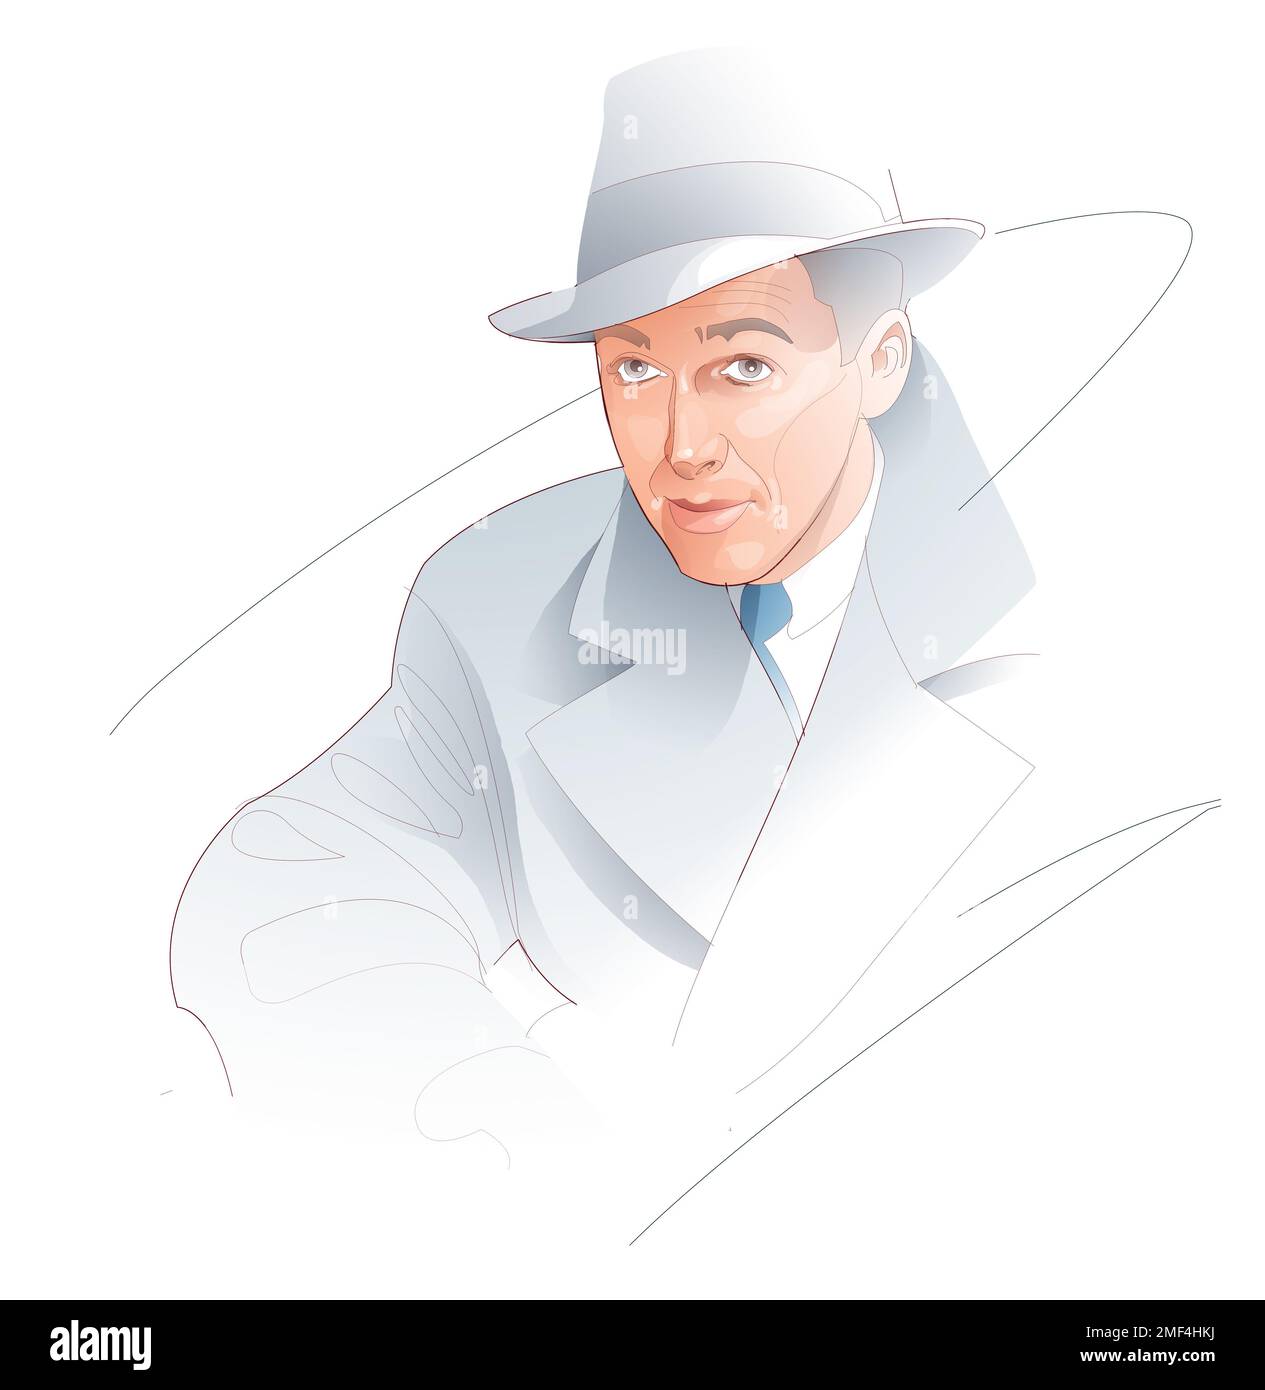 Digital illustration of actor James Steward. American classic cinema. Dressed in a raincoat and hat, on a white background. Stock Photo